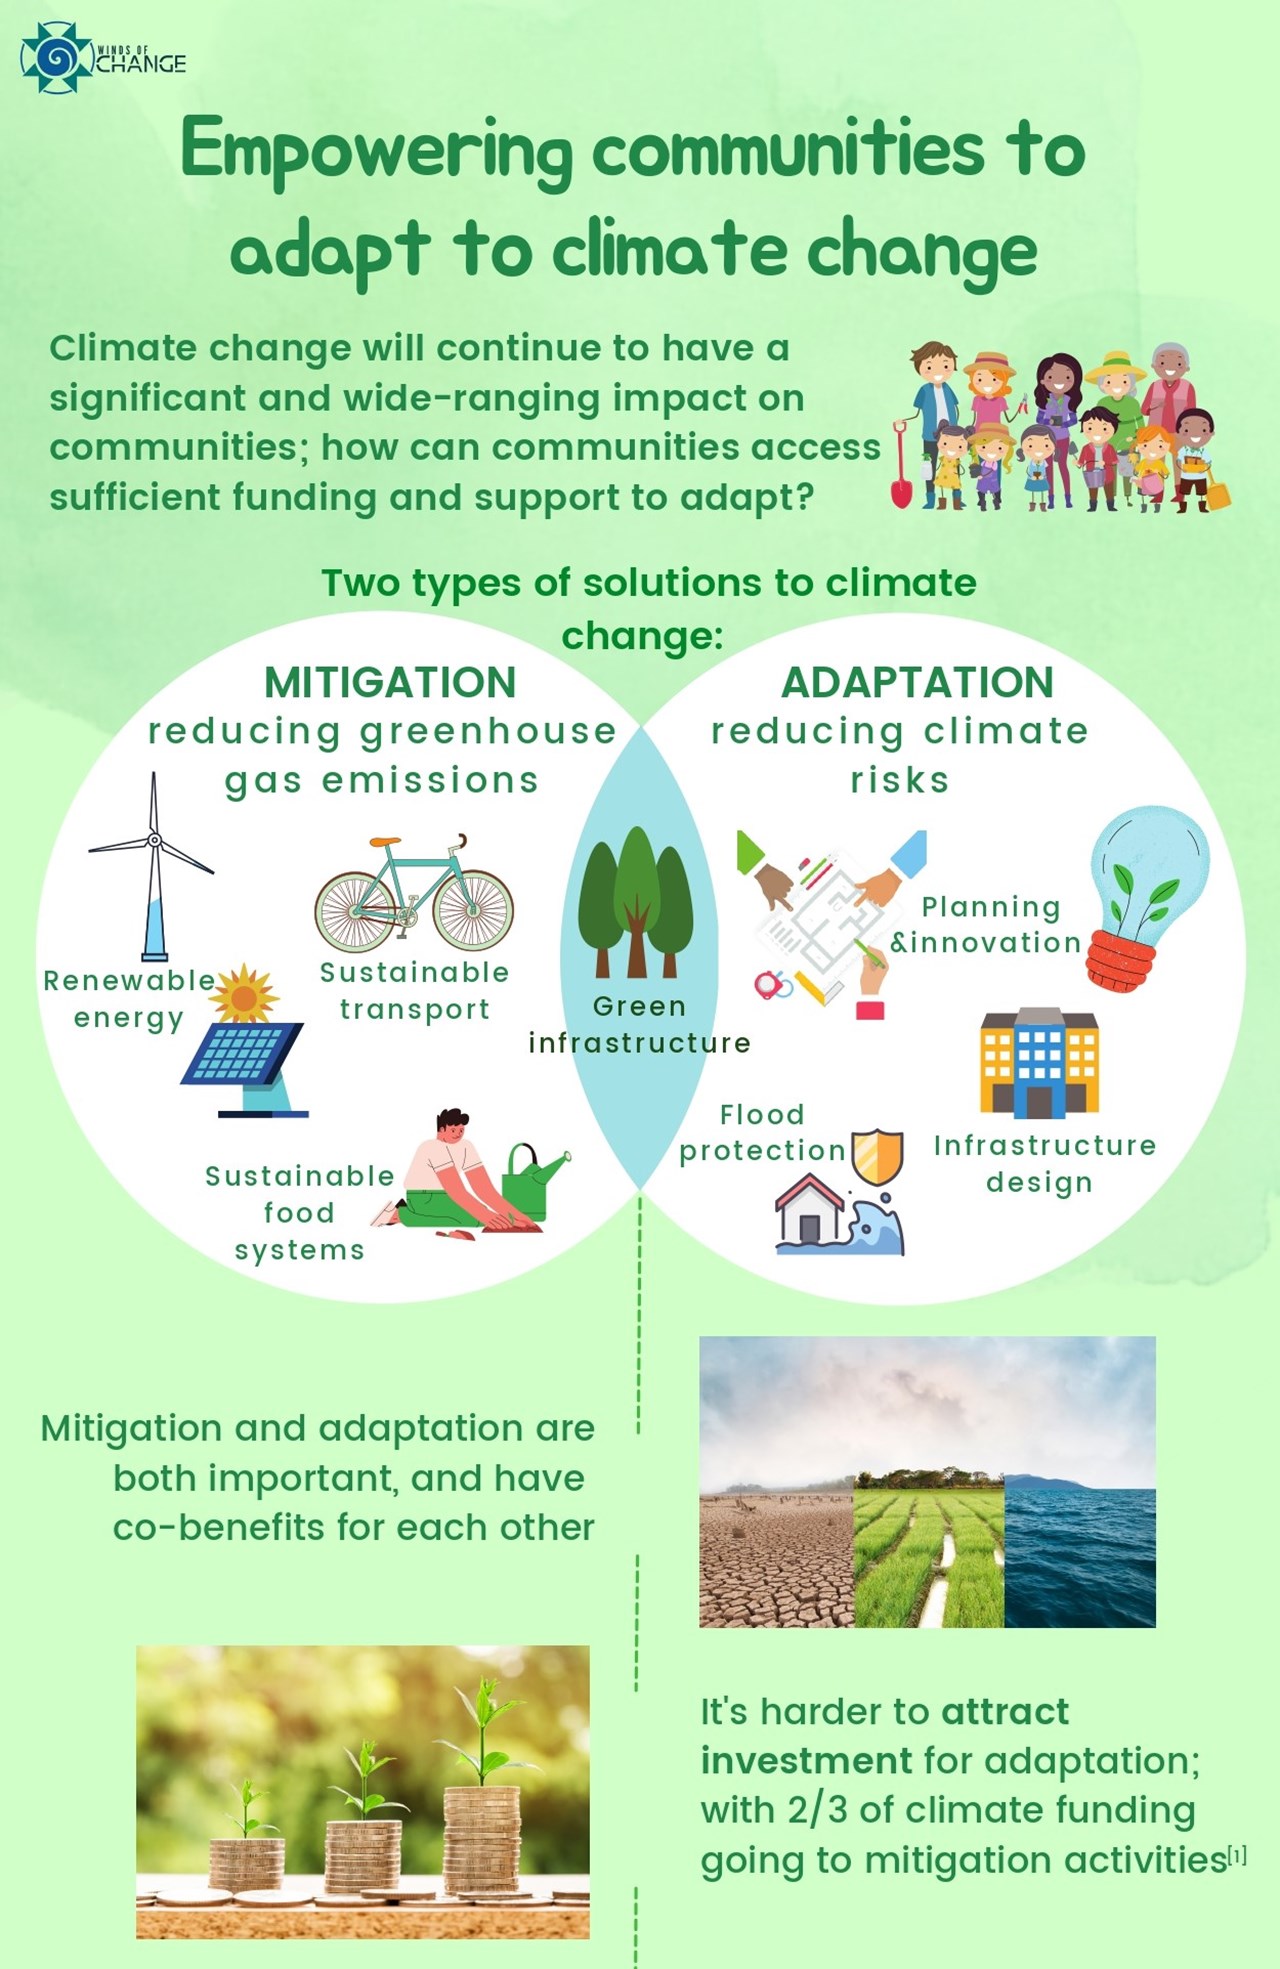 Image Expanding private sector finance in climate change community-based projects for Chile and New Zealand infographic_page-0001 (2).jpg